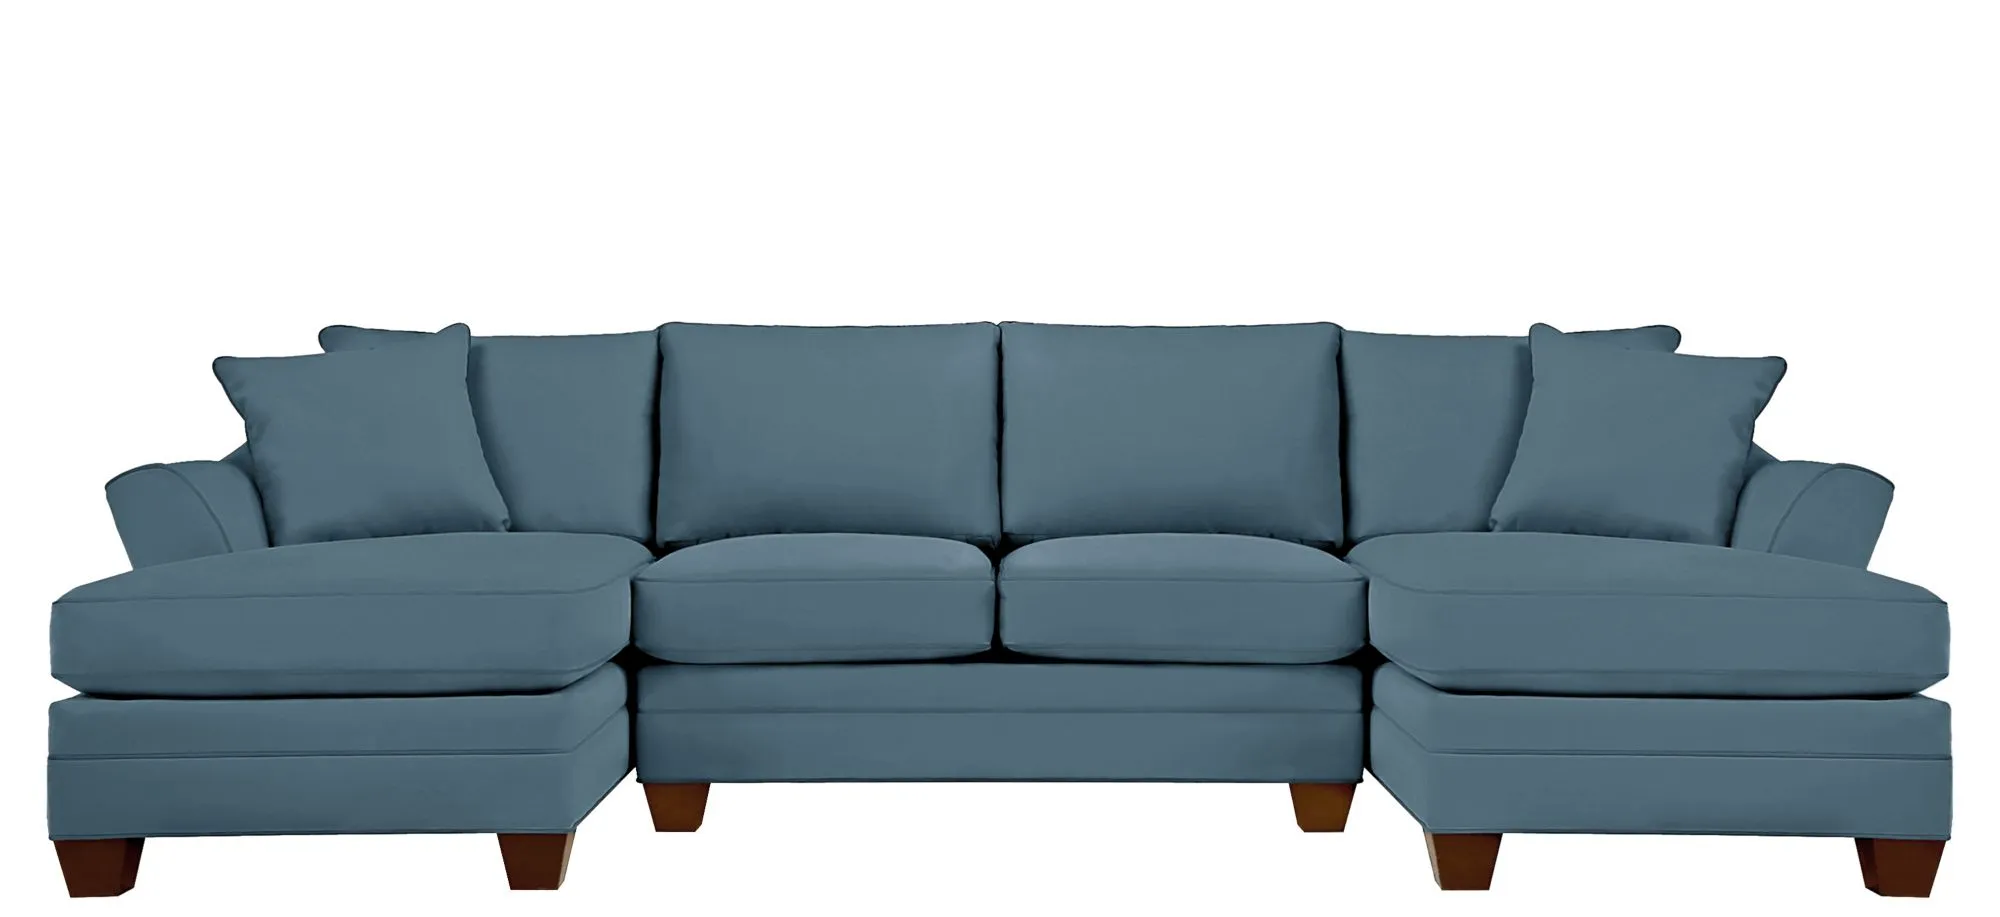 Foresthill 3-pc. Symmetrical Chaise Sectional Sofa in Suede So Soft Indigo by H.M. Richards